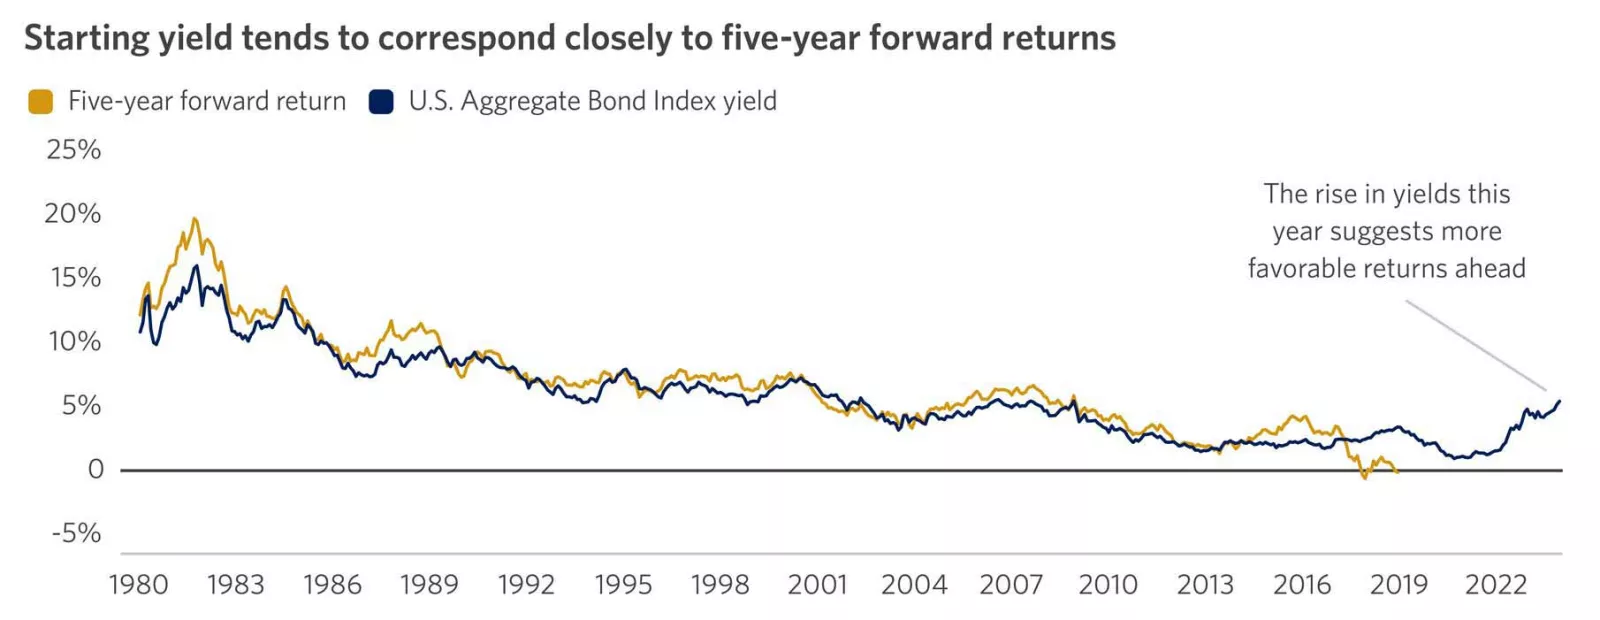 The chart shows that over five-year periods, high-quality bond returns have tended to approximate their starting yield.